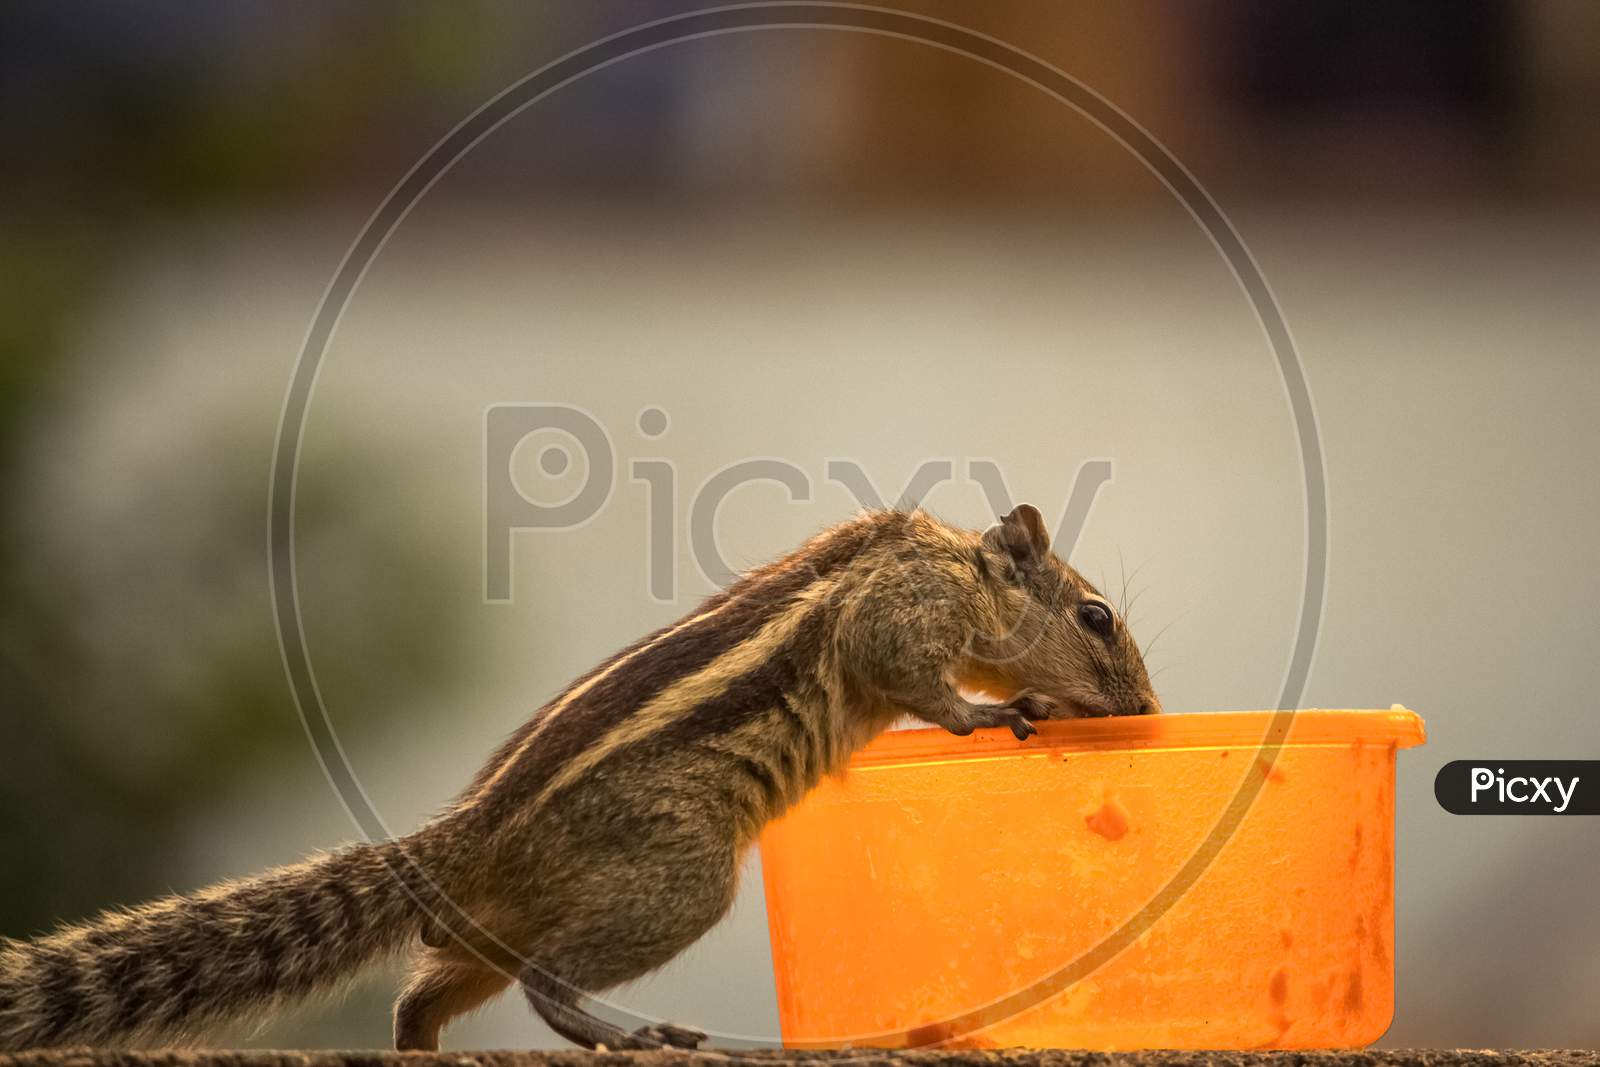 Cute Palm Squirrel Eating Fruits In The Park.The Indian Palm Squirrel Or Three-Striped Palm Squirrel Is A Species Of Rodent In The Family Sciuridae Found Naturally In India And Sri Lanka